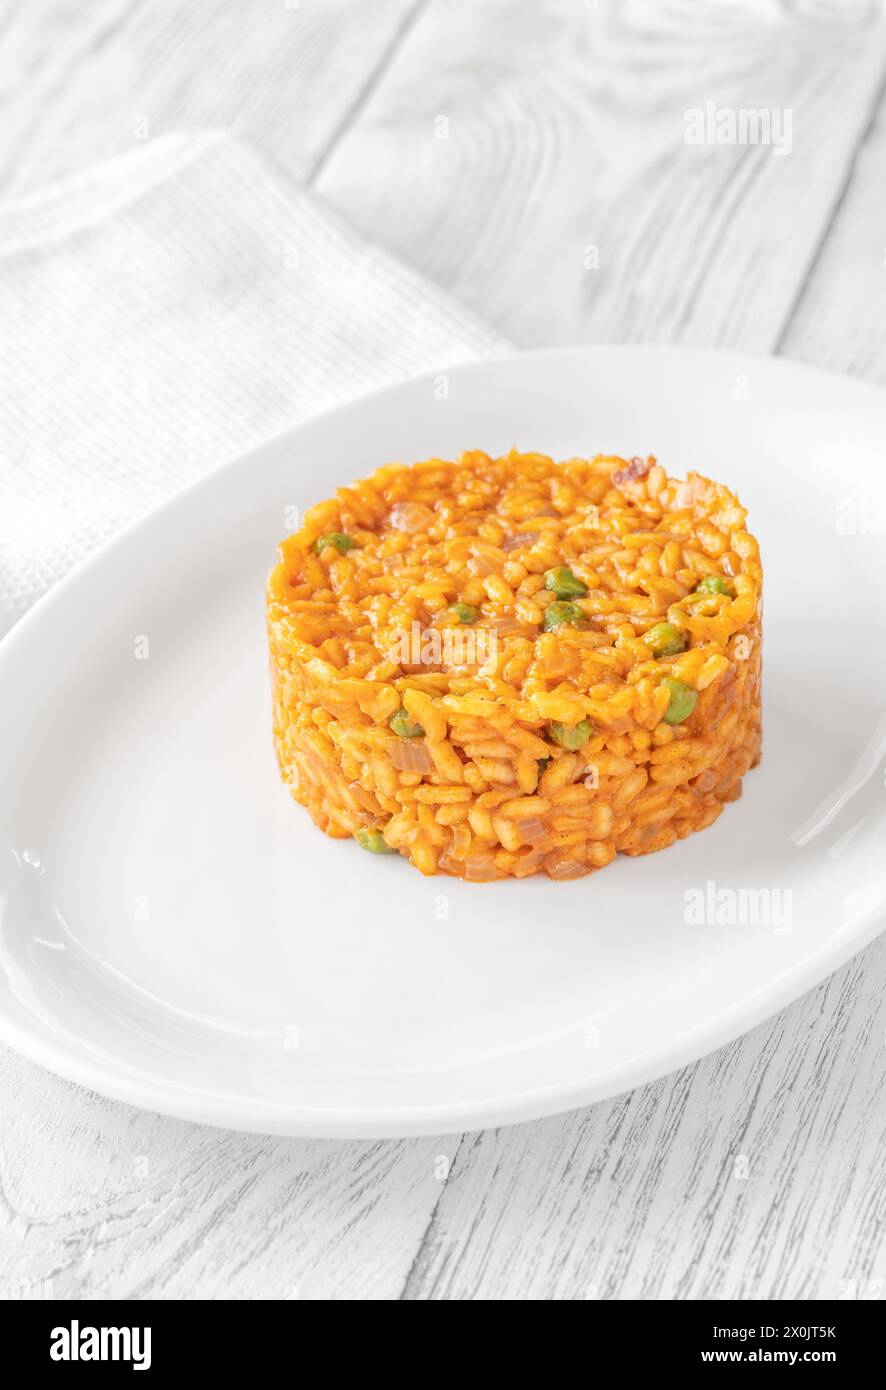 Portion of risotto with chorizo sausage and green peas Stock Photo